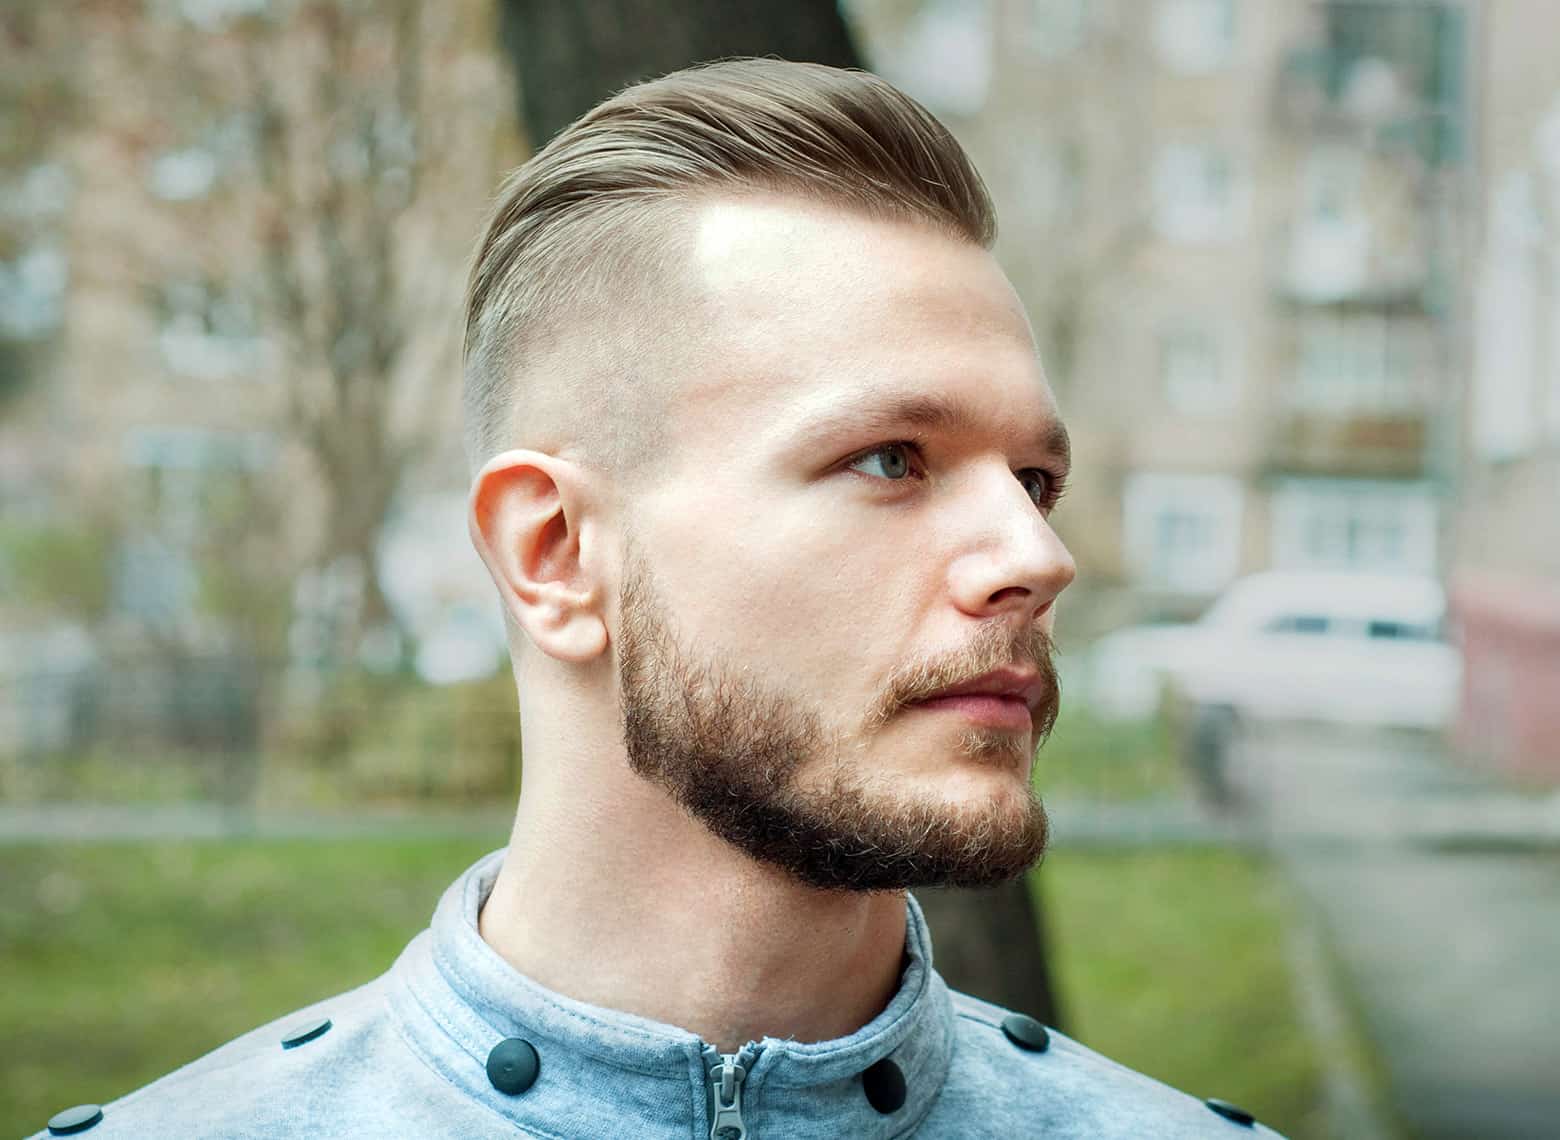 The 23 best drop fade hairstyle ideas for men - The Manual